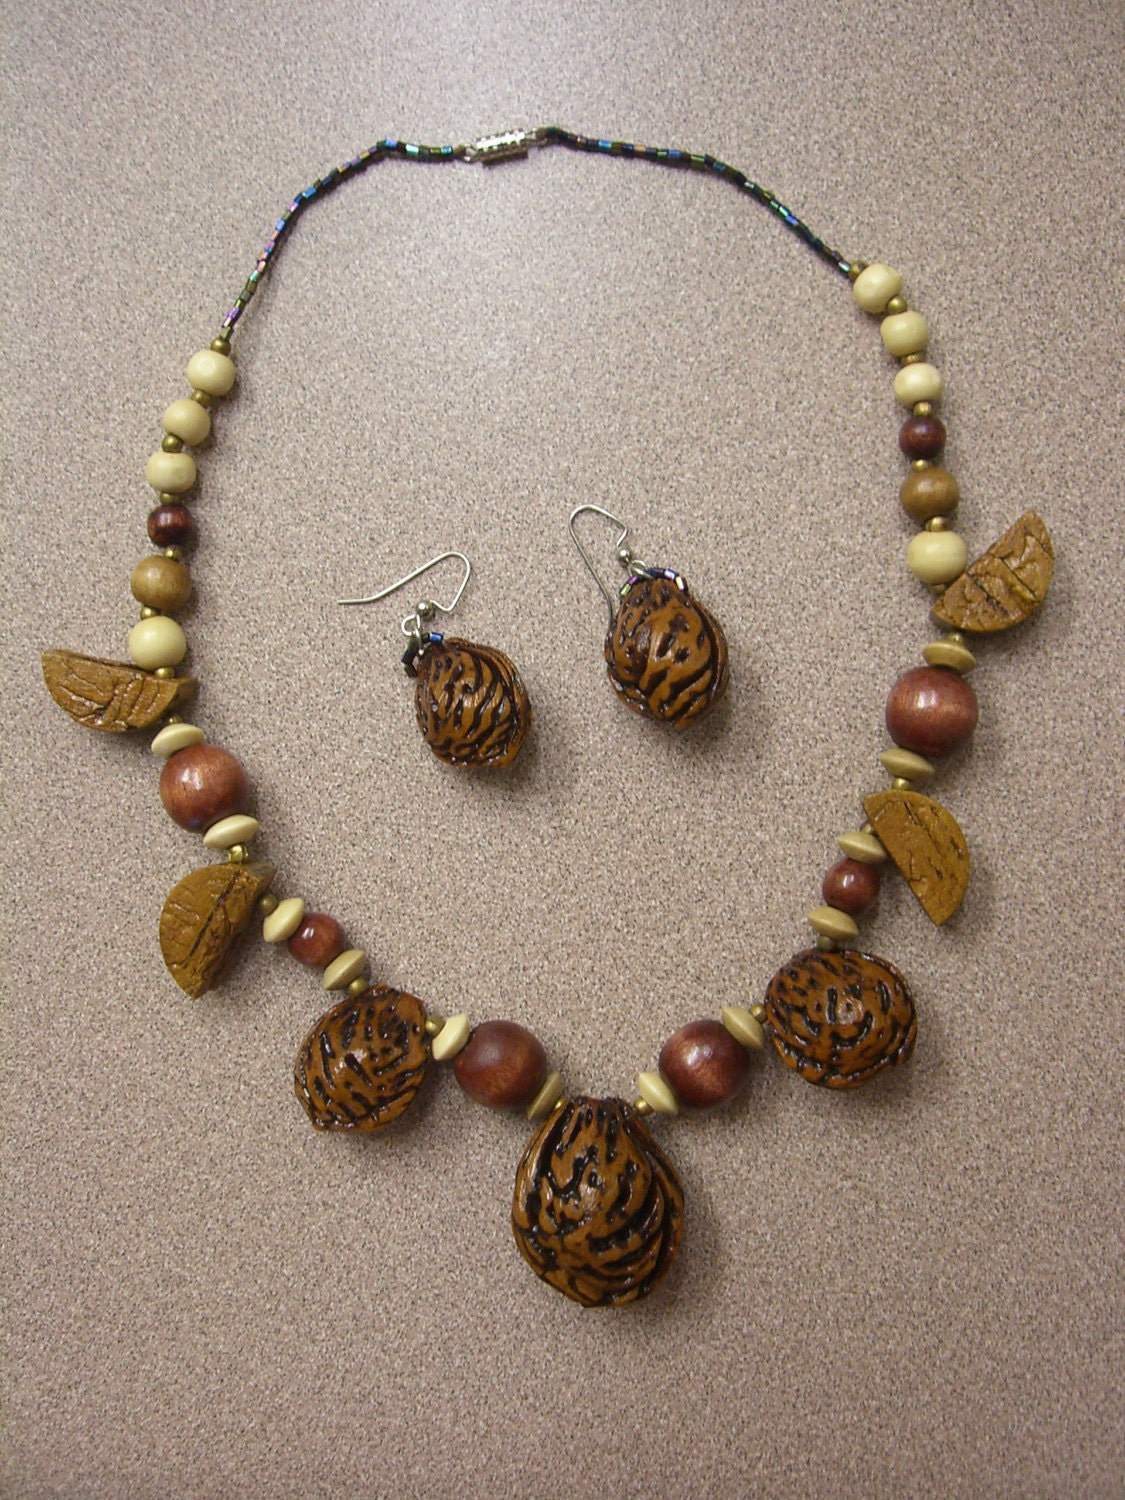 Organic, Recycled Seed Necklace and Earrings